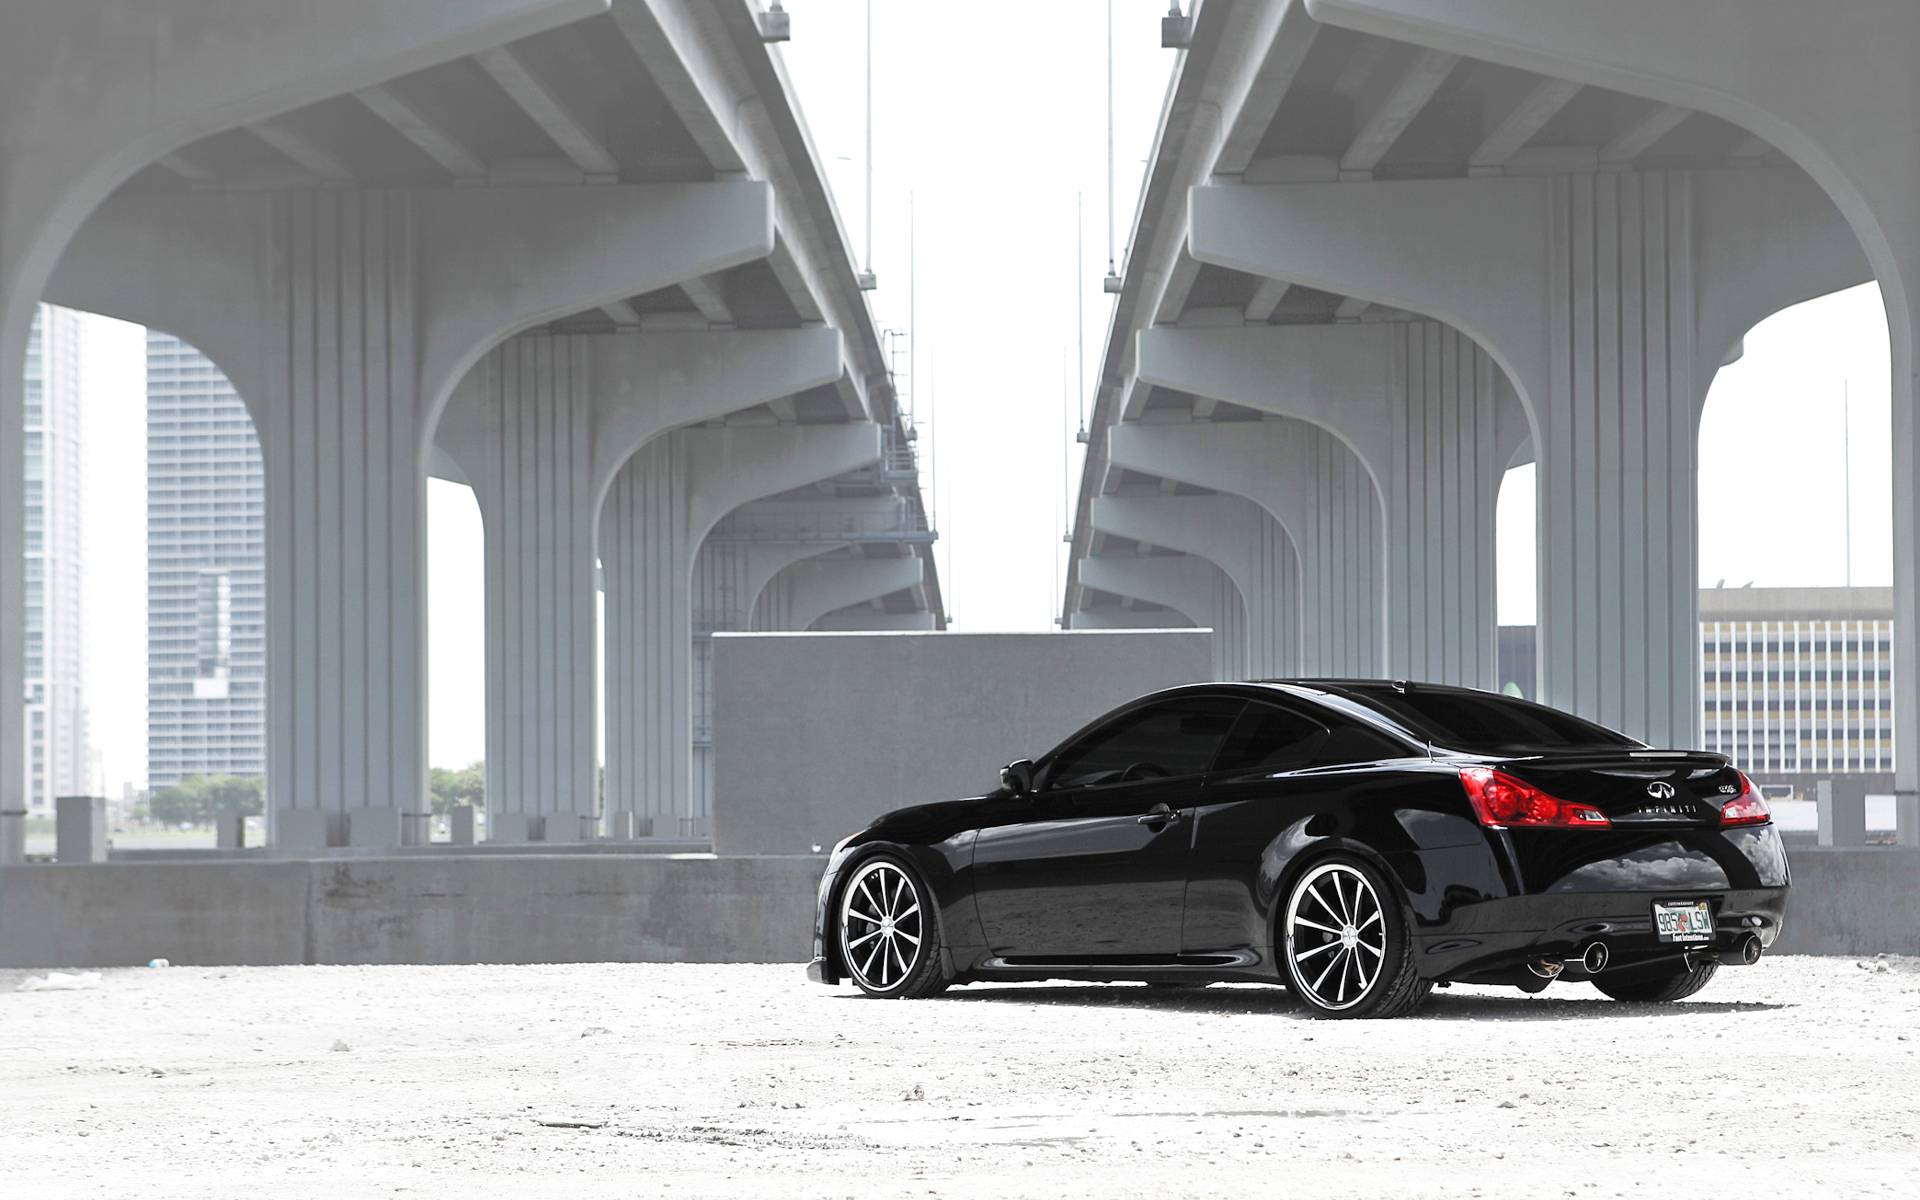 Infiniti G37s wallpaper and image, picture, photo